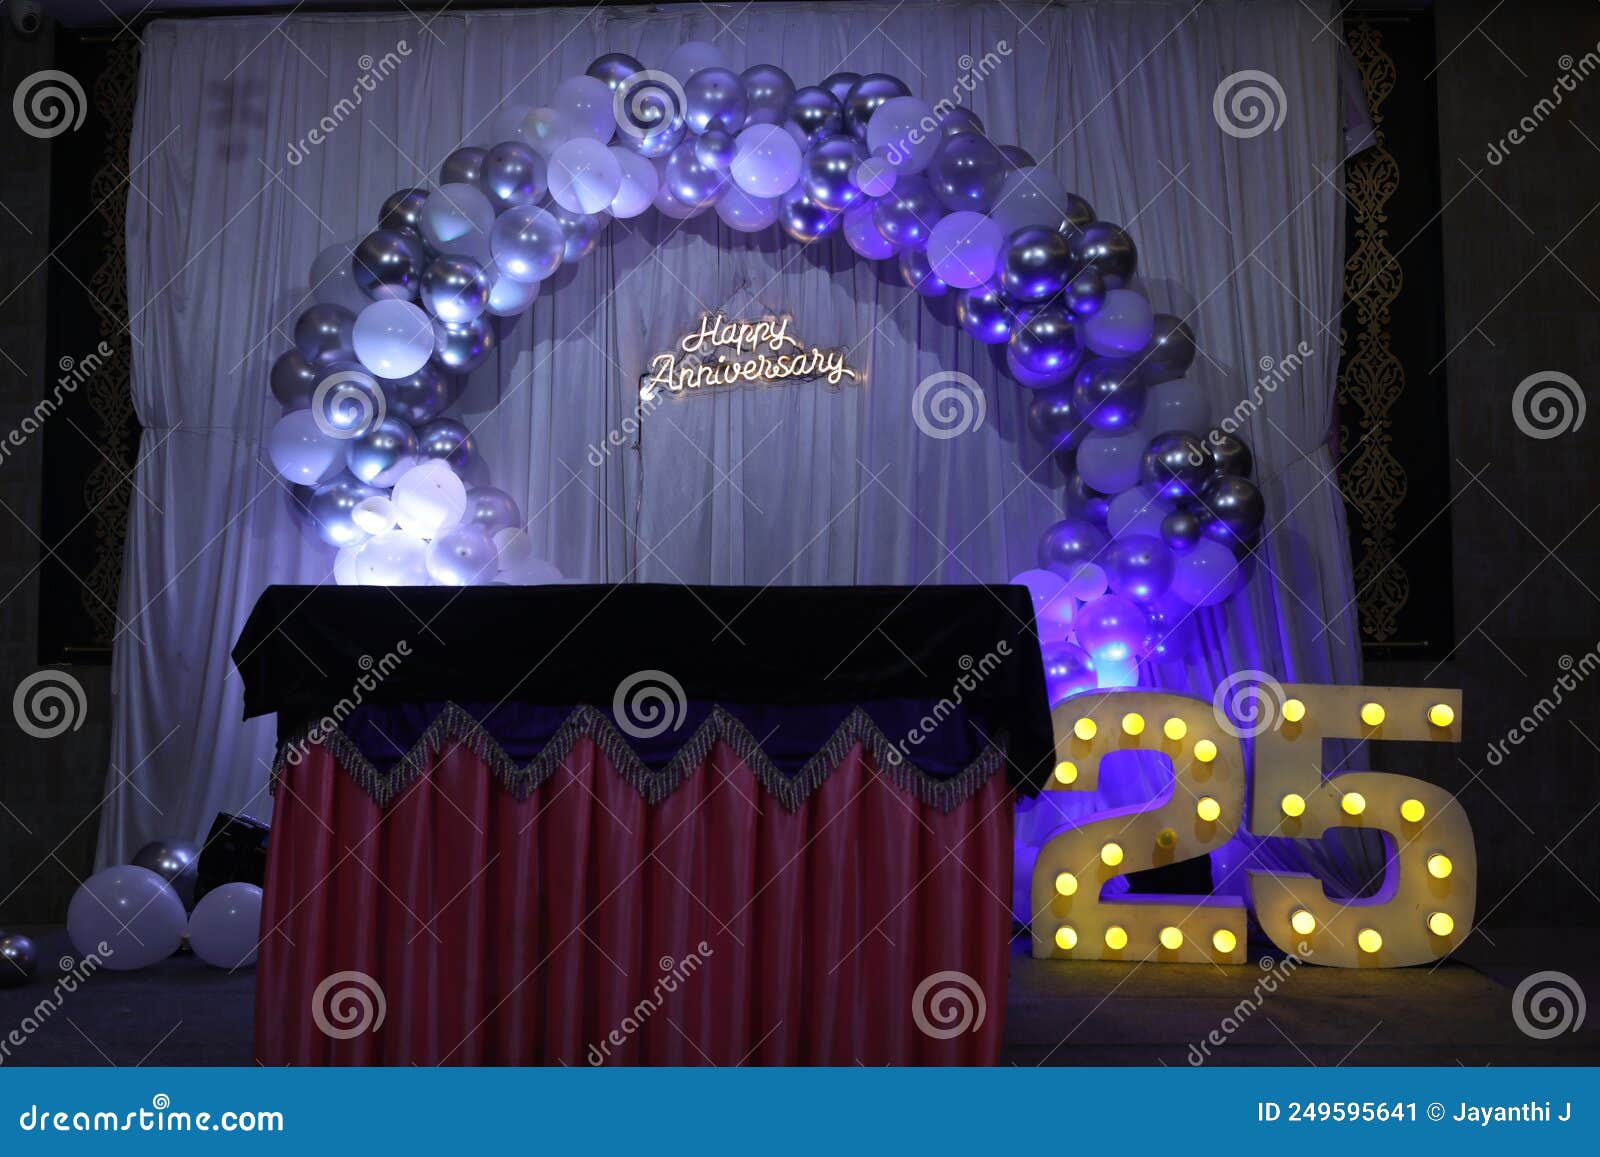 25th Wedding Anniversary Backdrop with Balloon Decoration in the ...